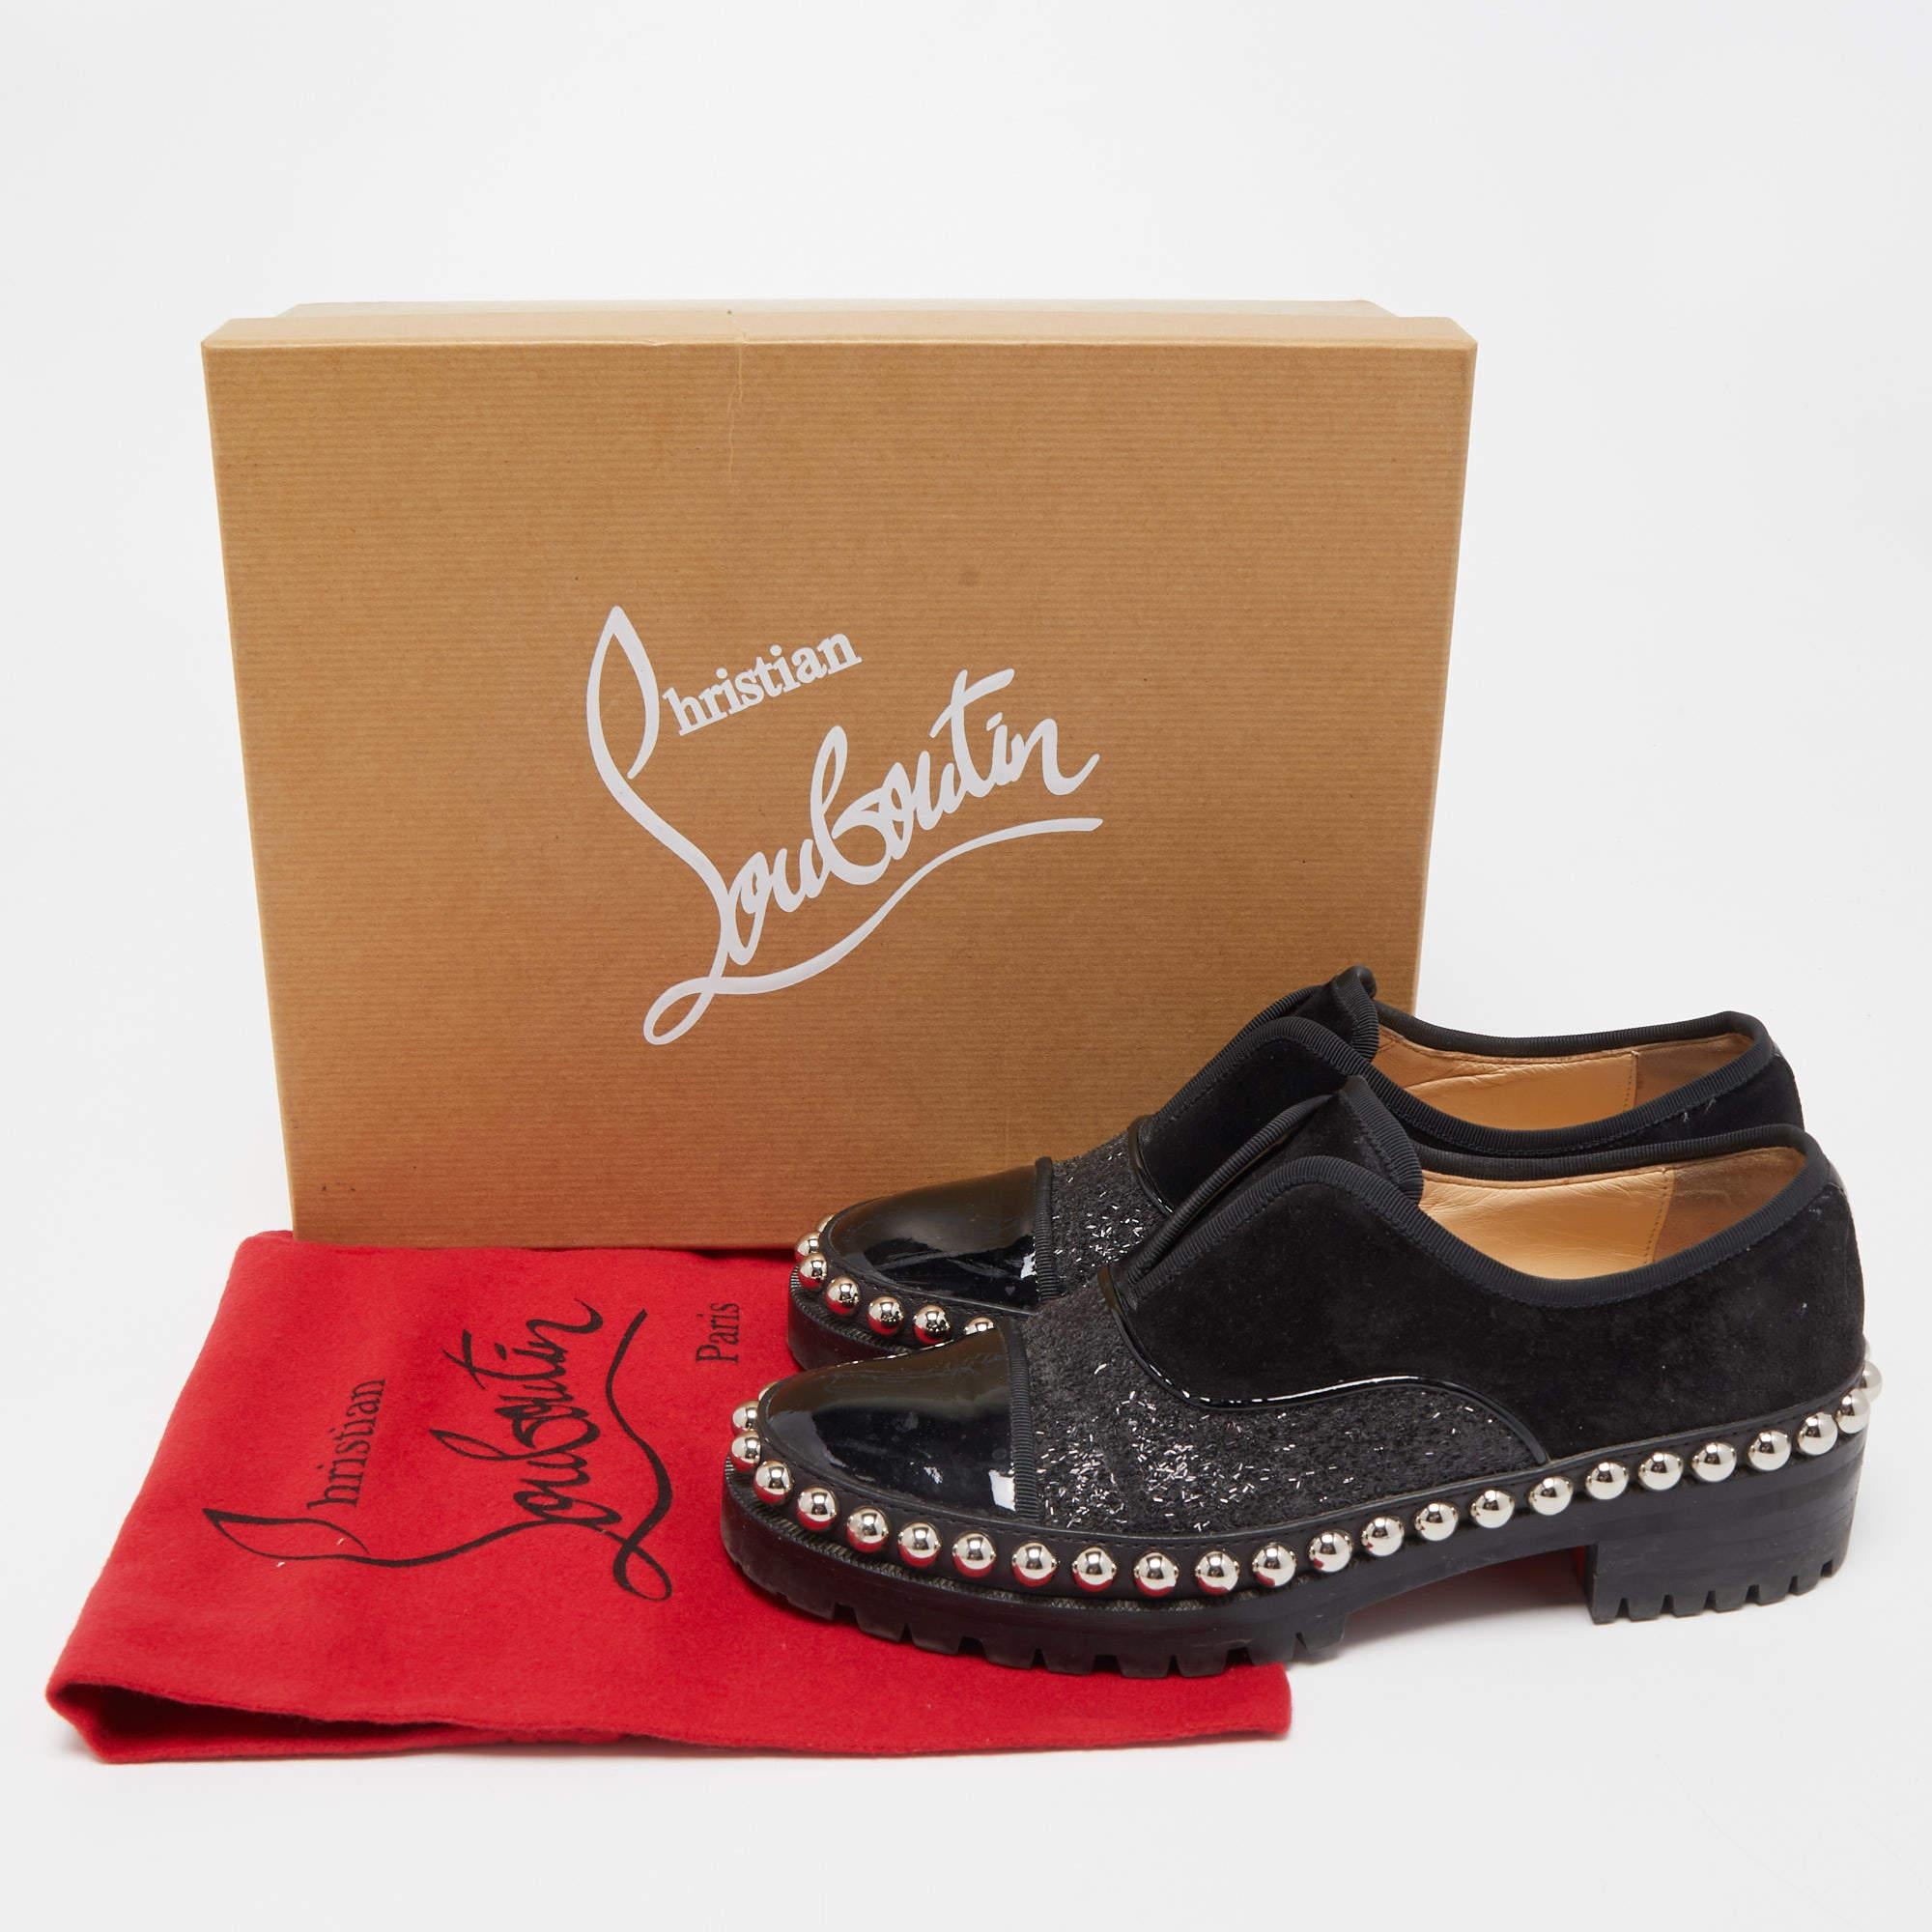 Christian Louboutin Black Suede, Glitter and Patent Leather Size 35.5 For Sale 2